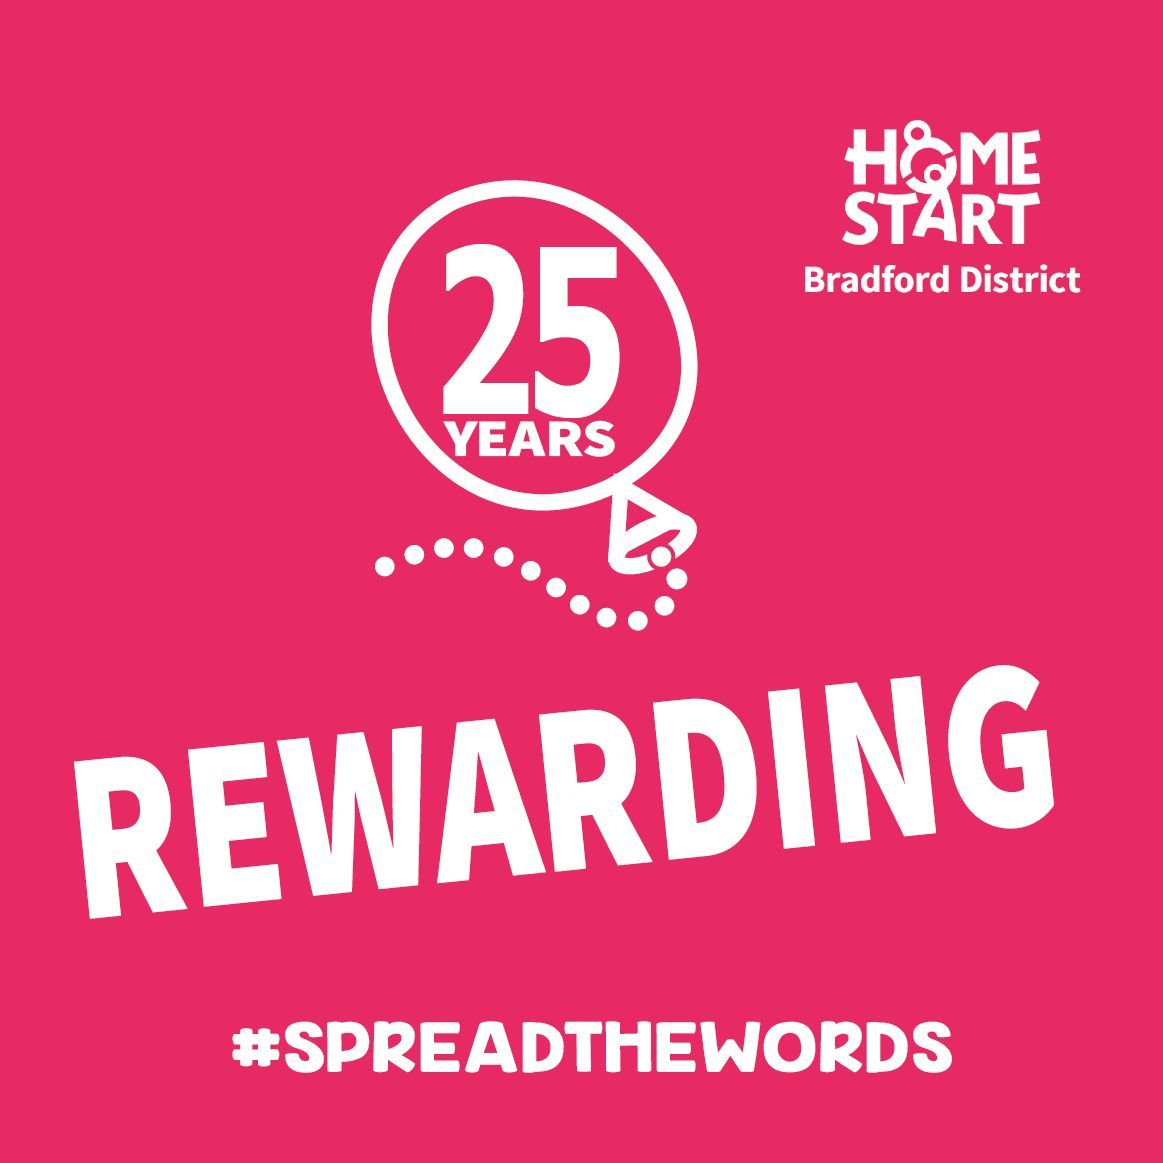 'It was so REWARDING for me when I could see over the weeks that Aisha was getting calmer and a lot less anxious. It showed me that the support I was providing was really making a difference.' 

Read Tanya's story here: 

buff.ly/3yc4PjK

#SpreadTheWords